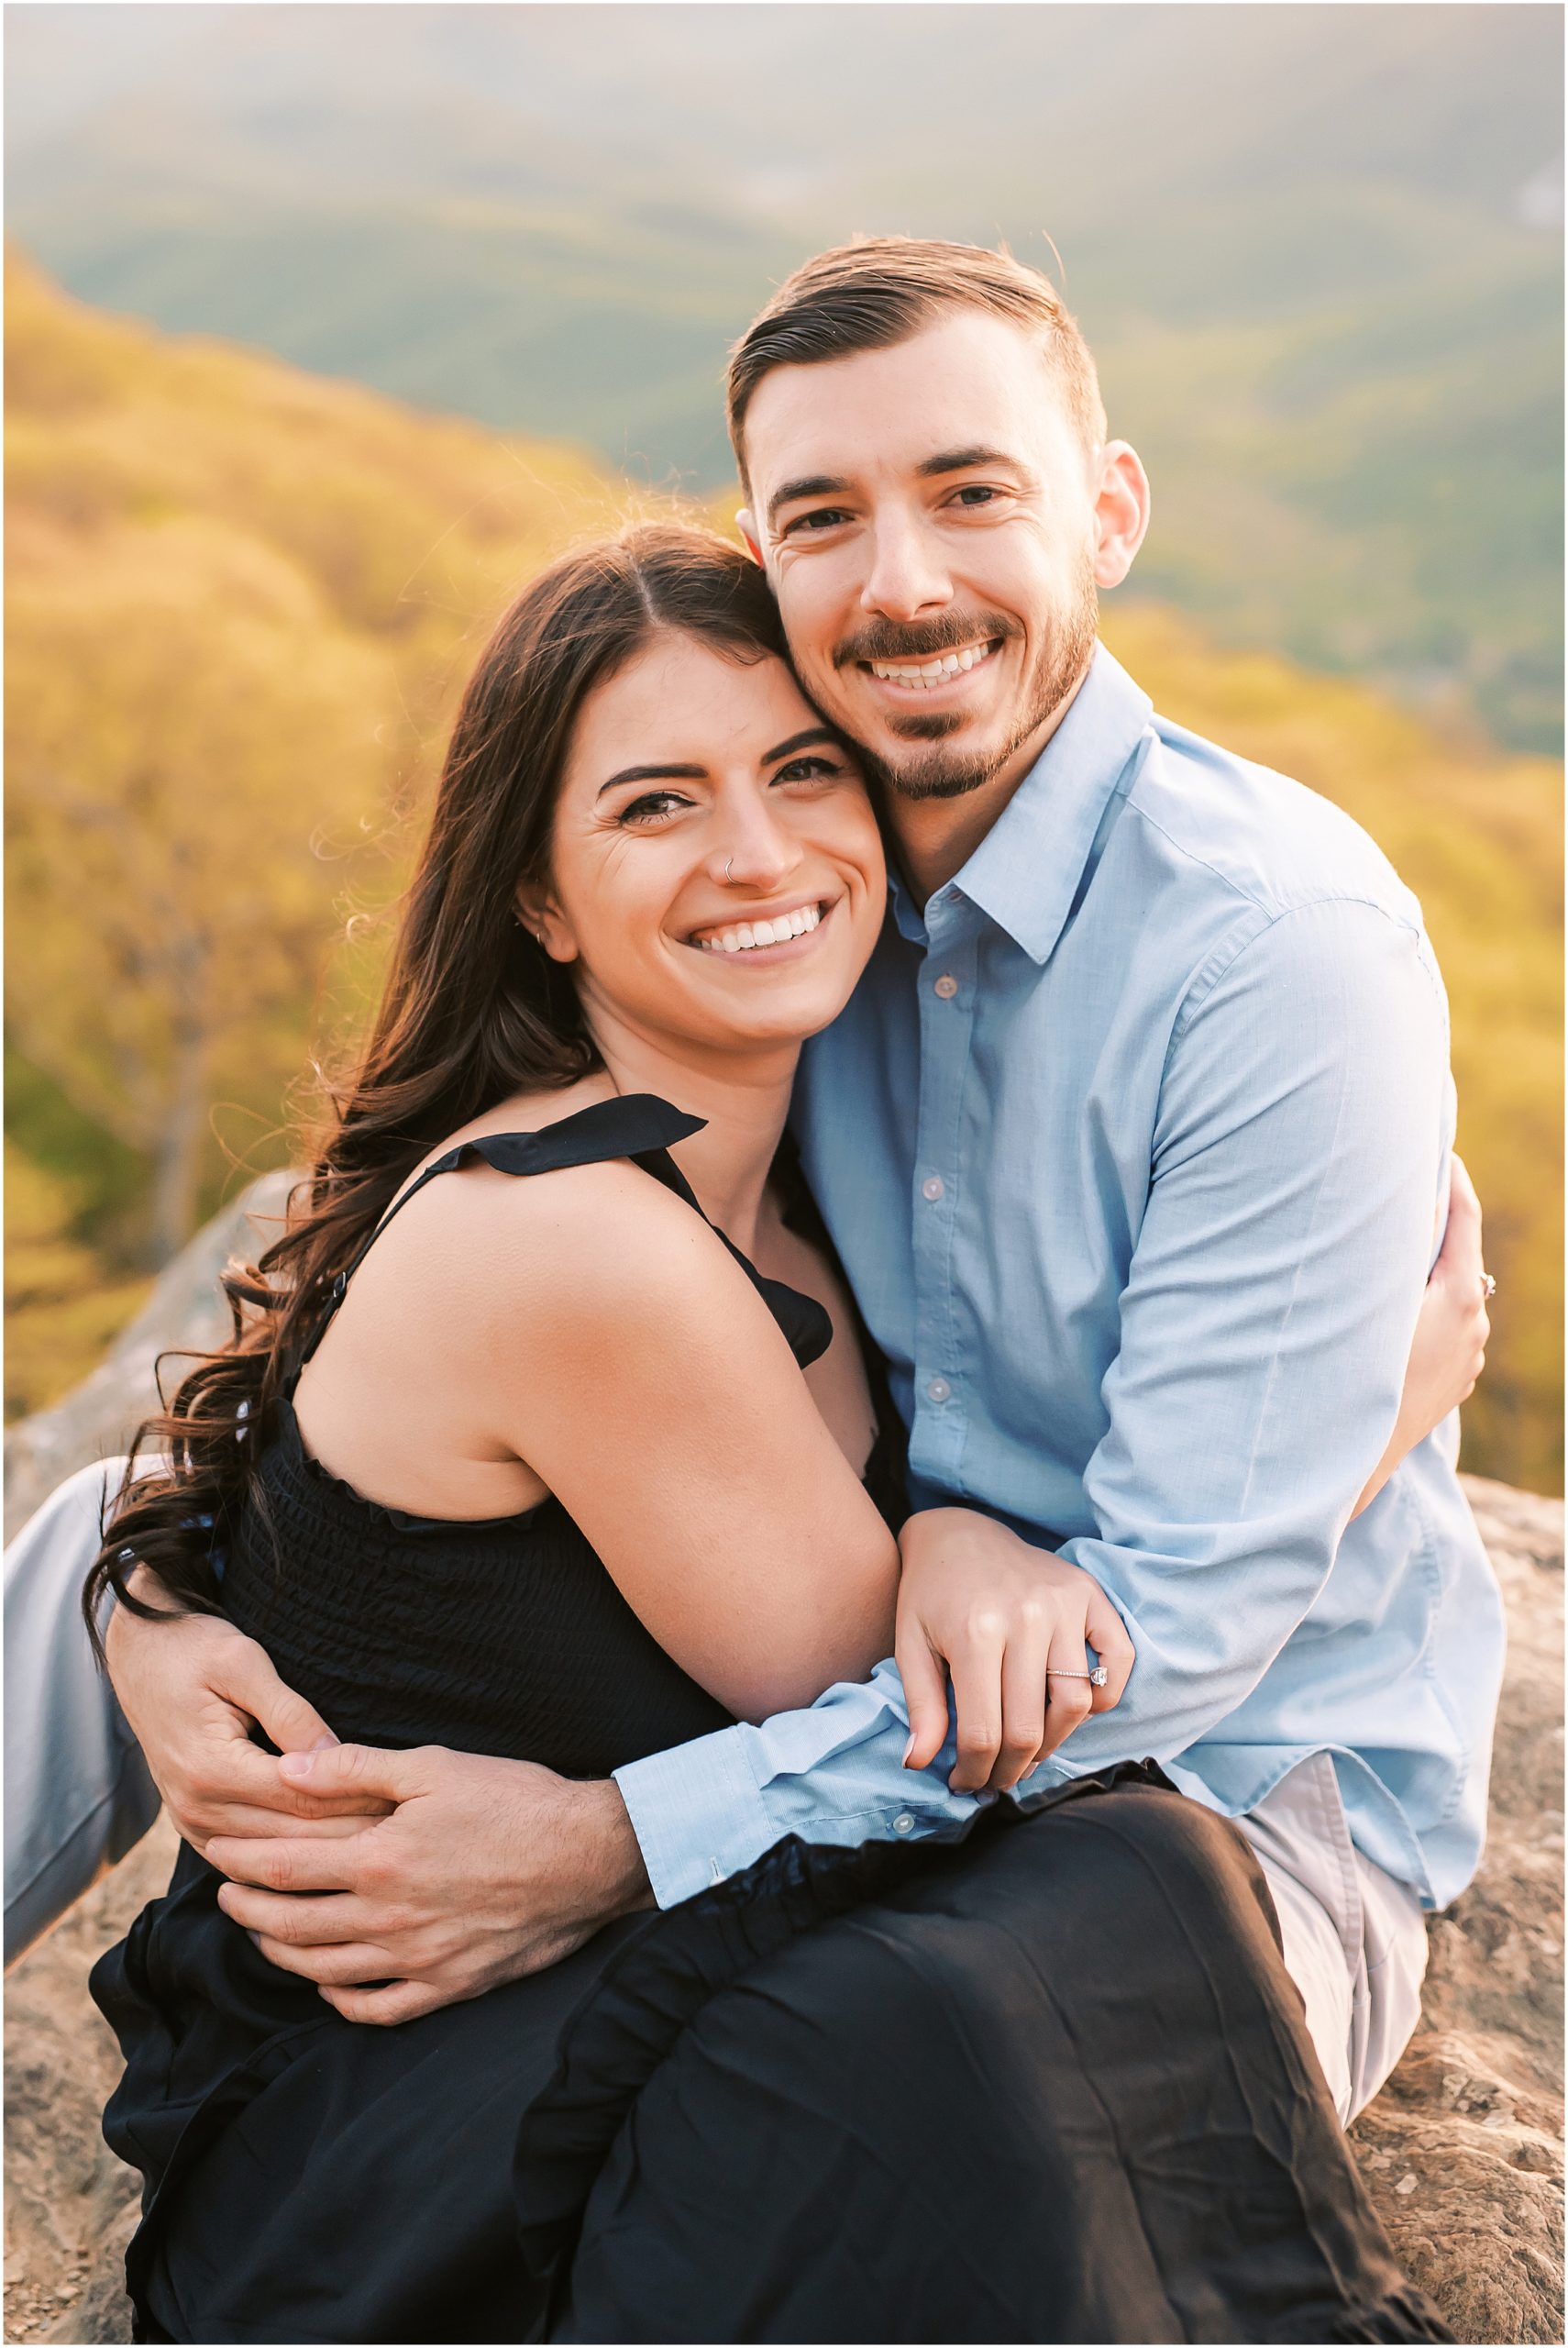 Smiling couple during engagement session